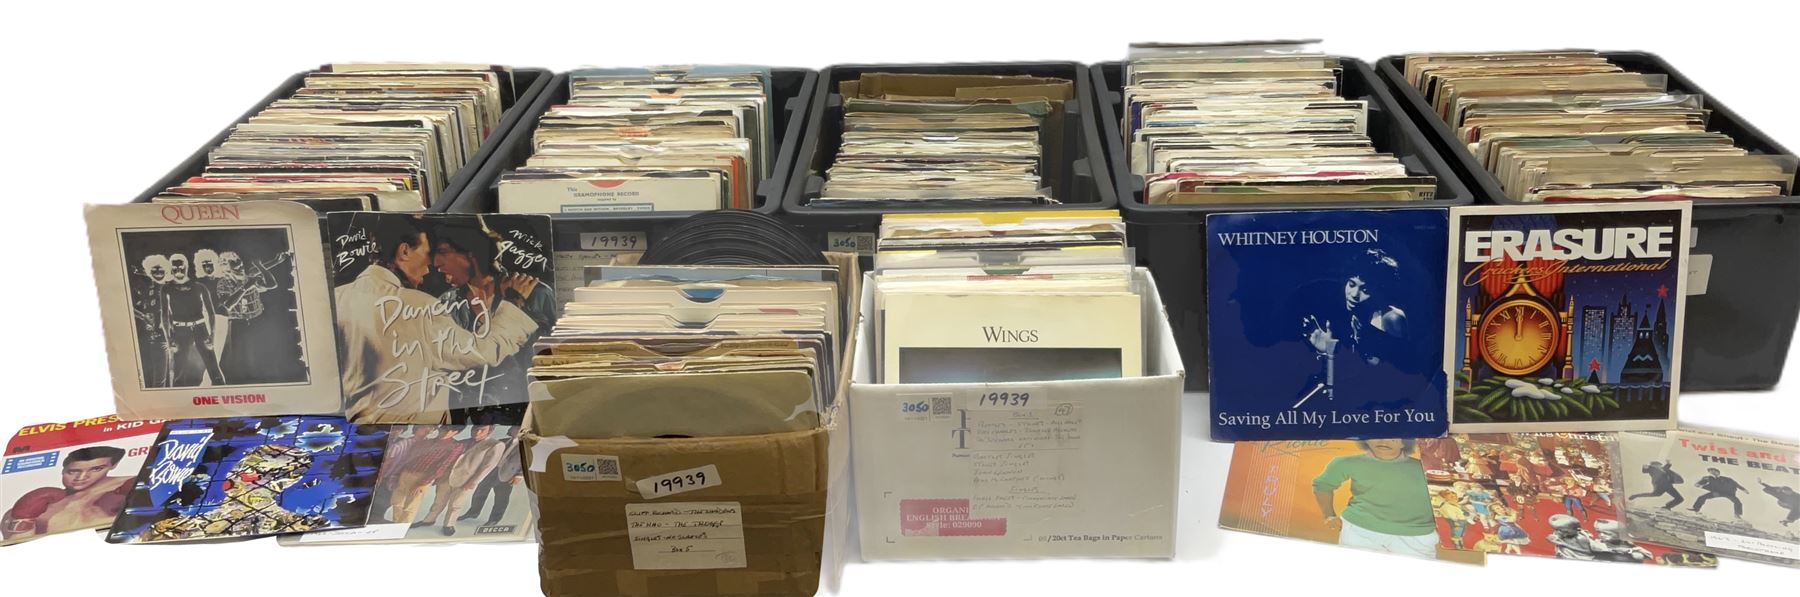 Seven boxes containing approximately eight hundred 45rpm singles